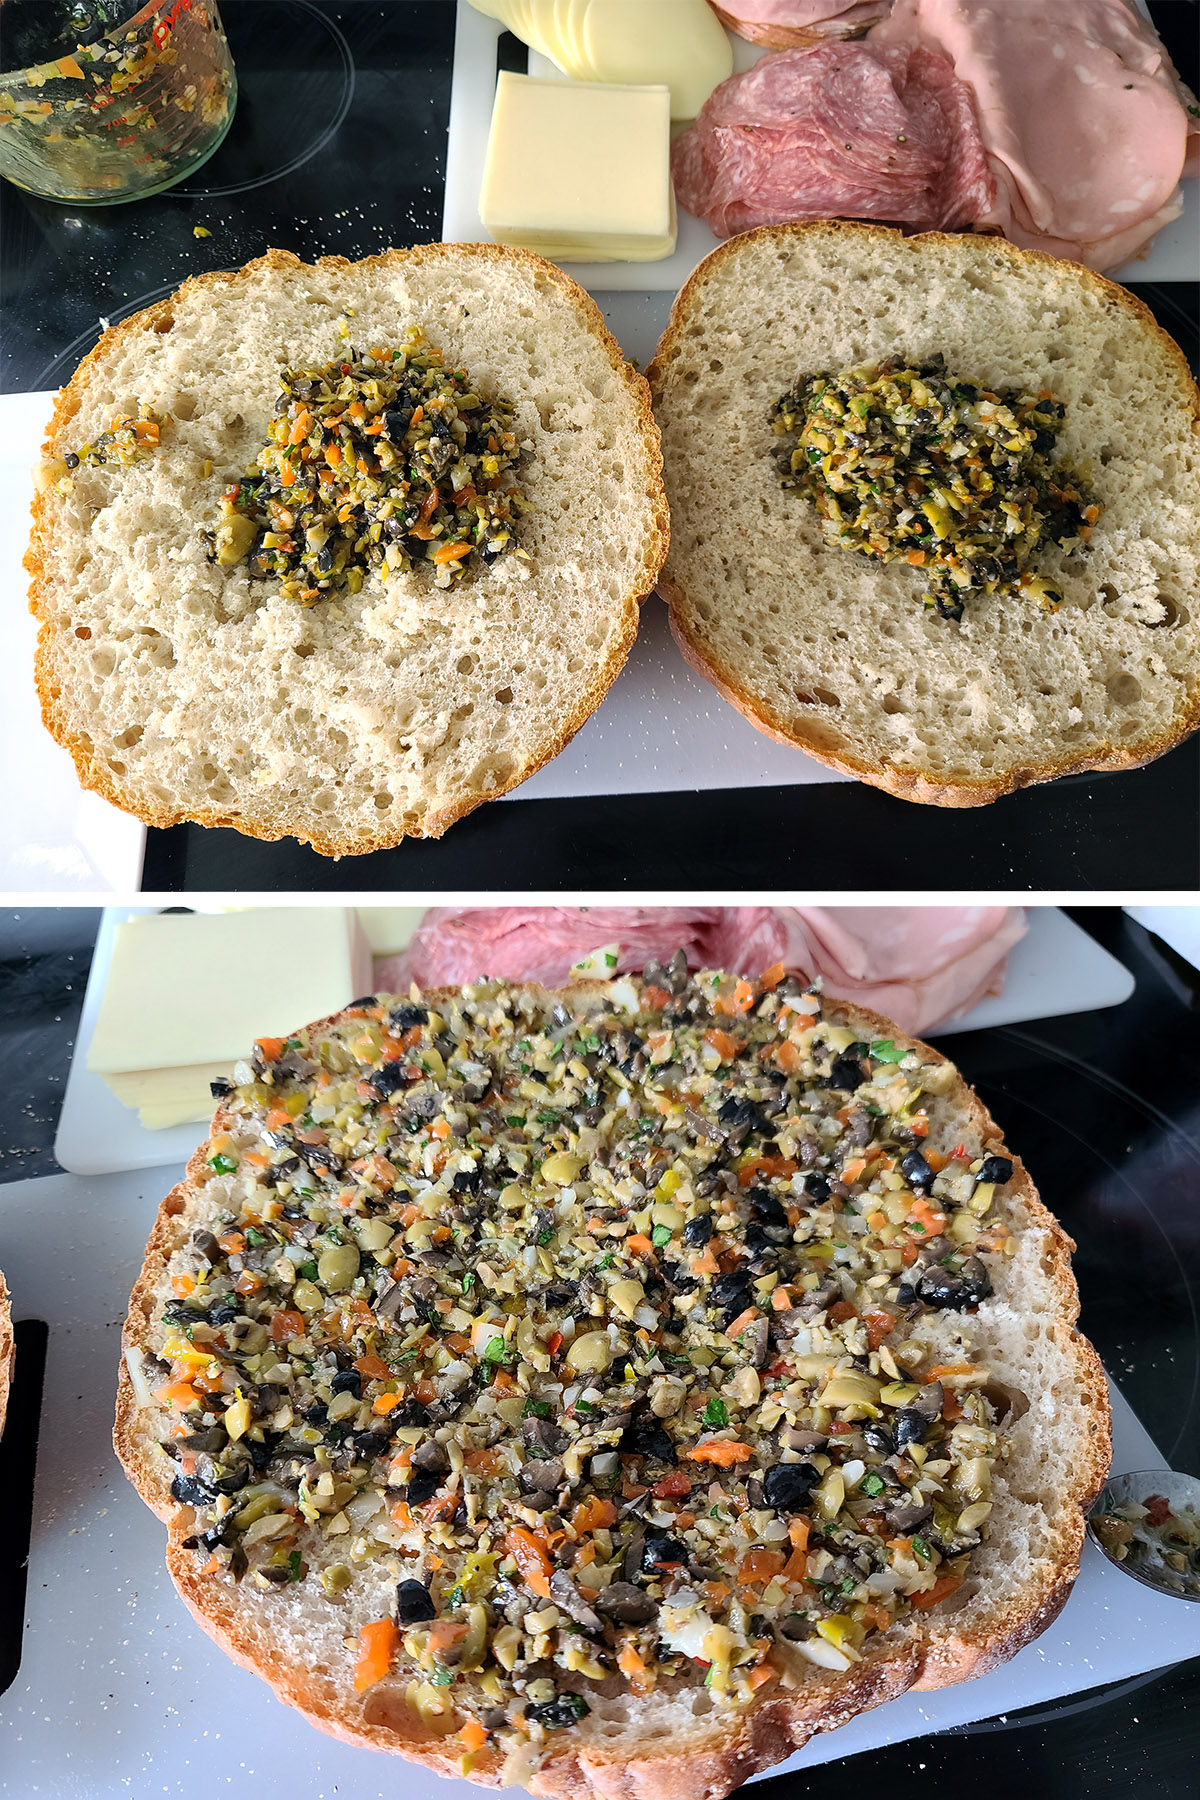 A two part image showing the loaf of bread split in 2 and spread with olive salad.